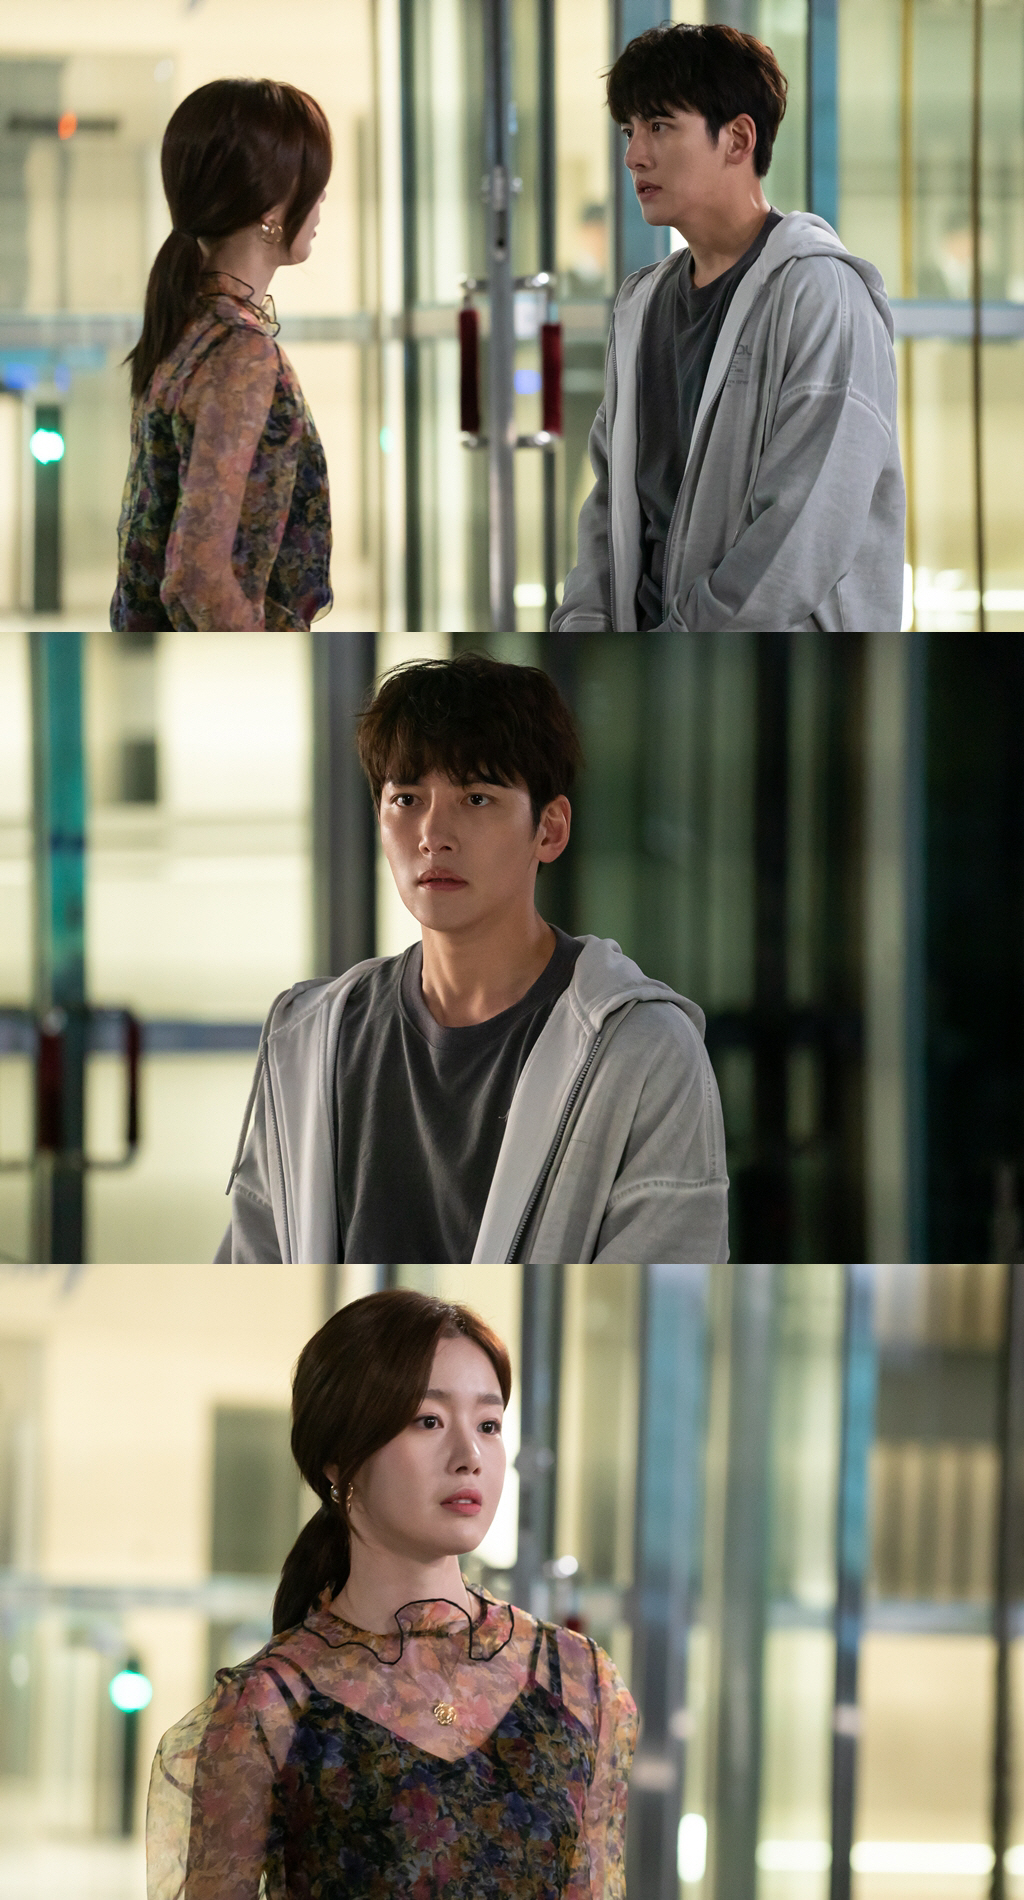 Choi Dae-heon (Ji Chang-wook) and Han Sun-hwa (Boon) appear as a couple in SBS gilt drama Convenience store morning star (playplayplay by Son Geun-joo/director Lee Myung-woo/Produced by Taewon Entertainment).Choi Dae-heon and Yoo Yeon-ju, who have different family environment, personality and taste.There are events in which cracks have begun to occur in the relationship between these two people, and they are amplifying their interest in future development.Choi Dae-heon and Yoo Yeon-ju have been separated by Misunderstood in the last five broadcasts.Choi Dae-heon, who went to the house of Yoo Yeon-ju to solve Misunderstood, saw Yoo Yeon-ju on the back of director Cho Seung-joon (Do Sang-woo).Cho Seung-joons back and the soft-spoken and their affectionate appearance, Choi Dae-heon, who had to look at them, was sad.Meanwhile, the 6th scene of Convenience store morning star released on July 4 focuses attention on the airflow of those who have become colder.Choi Dae-heon draws a line with Jeong Sae-byeol (Kim Yoo-jung) and tries to solve the flexibility of Misunderstood.However, while ignoring the gaze of Choi Dae-heon, who desperately sees himself, Yoo Yeon-ju avoids meeting with Choi Dae-heon, and their conflict becomes bigger.In addition, the 6th preview video also showed the appearance of Hye-ja Kim (Kum Mi-ri), a flexible mother who found Choi Dae-heons Convenience store, and brought tension.Hye-ja Kim asked Choi Dae-heons Convenience store for delivery, and Choi Dae-heon, who went for delivery in a Convenience store vest, was pictured finding a flexible house.Indeed, Hye-ja Kim is wondering what kind of plan it is and what kind of change it will bring between Choi Dae-heon and Yoo Yeon-ju.Ji Chang-wook is making various flavors of Convenience store morning star with deep emotional acting as well as comic acting that laughs.This time, I will draw a dense picture of Choi Dae-heons feelings in a close relationship with Yoo Yeon-ju.The stormy day of Choi Dae-heon, which can not be more salty, can be seen in the 6th SBS Golden Globe Drama Convenience store morning star which is broadcasted at 10 pm today (4th).